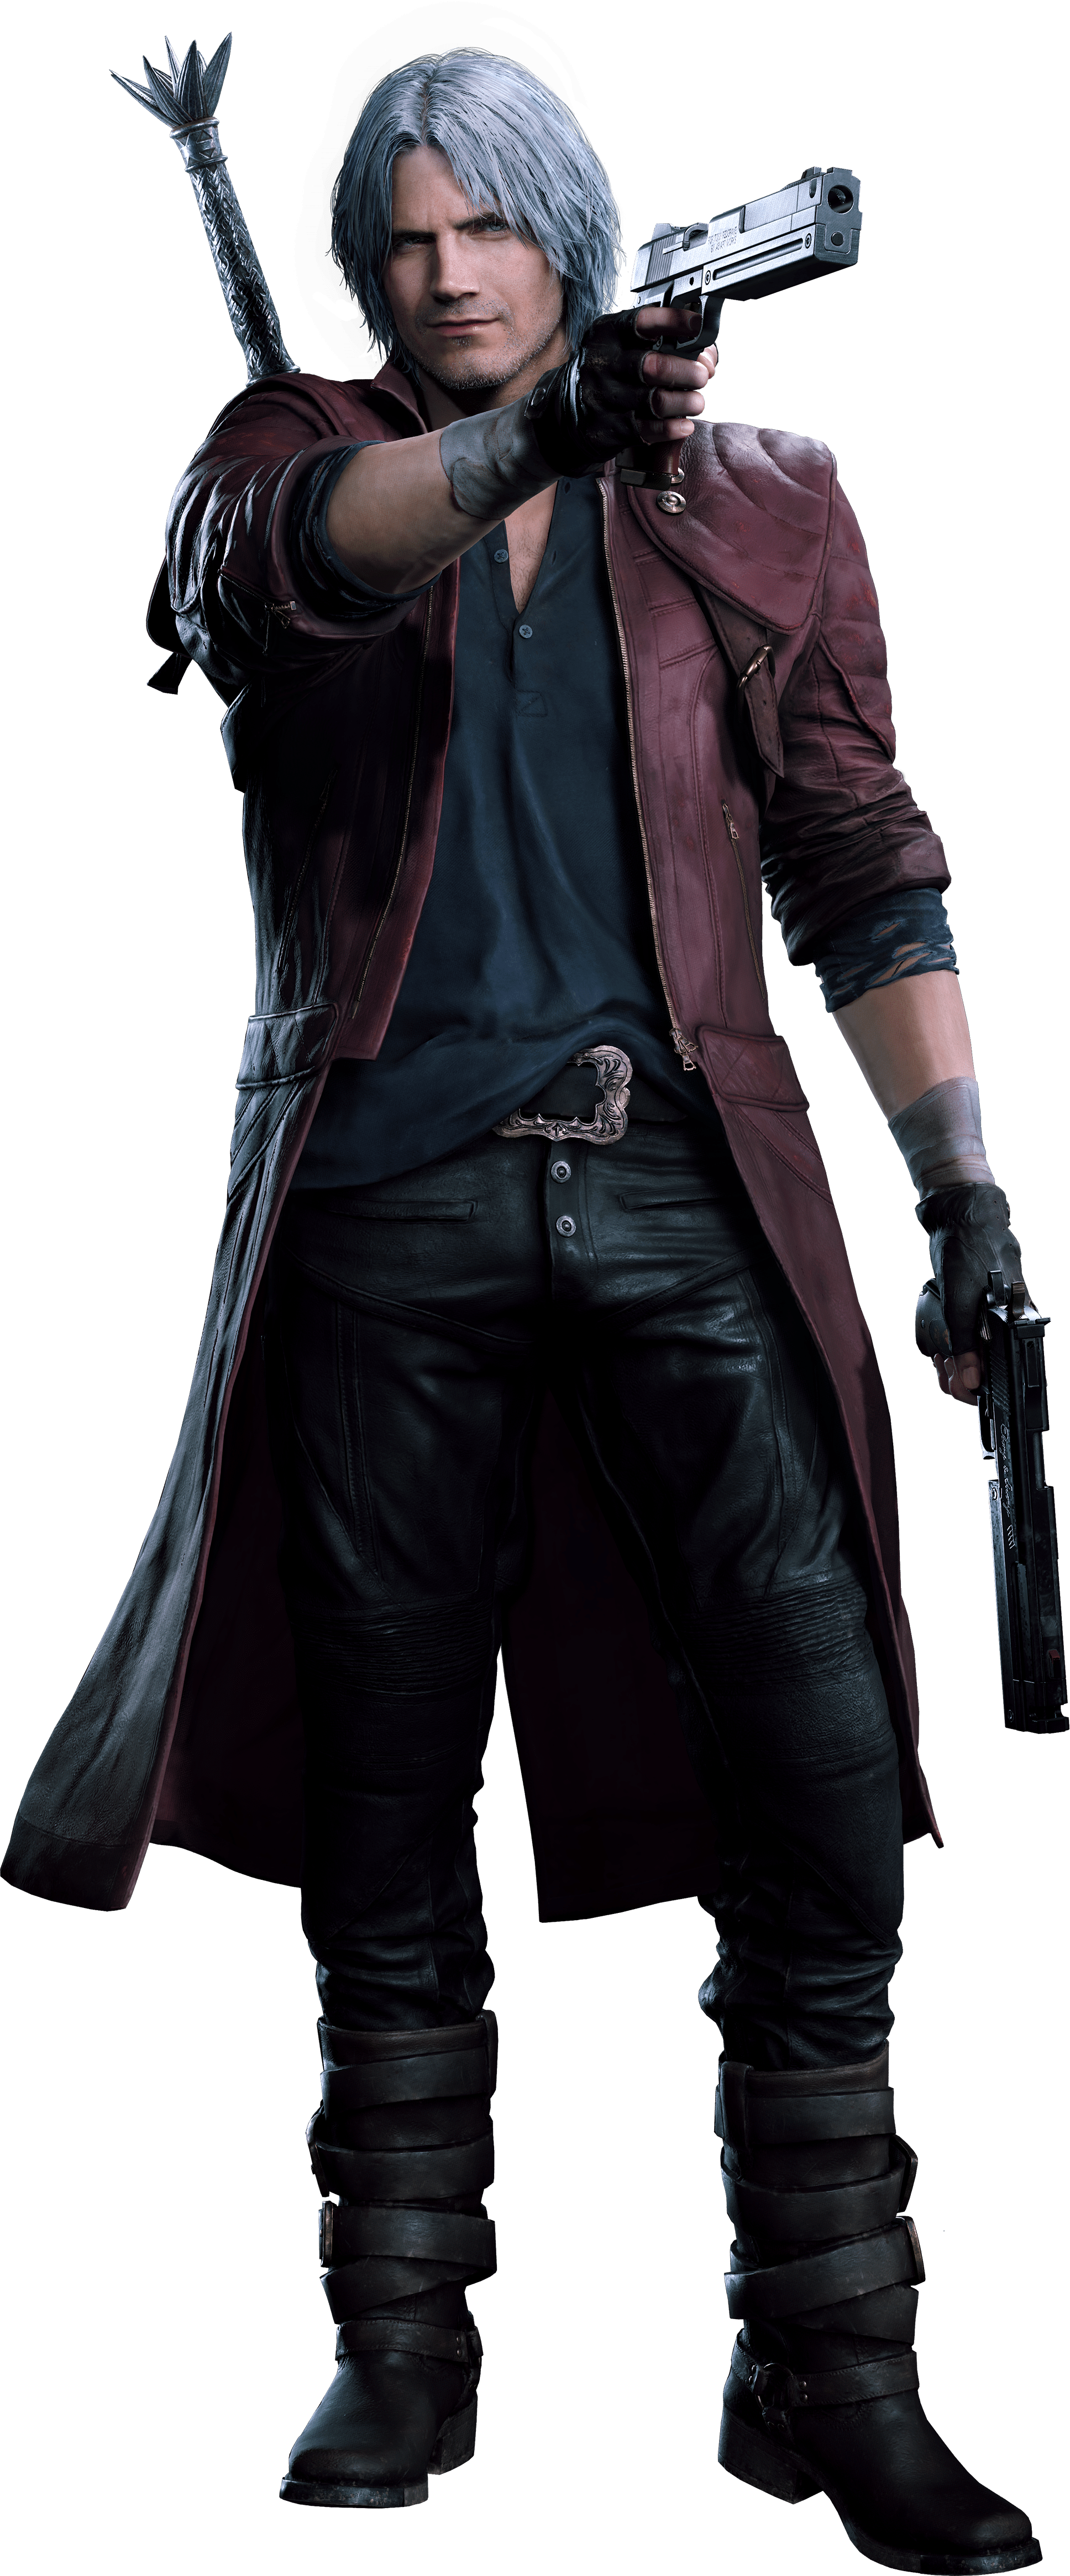 Dante Devil May Cry Heroes Wiki Fandom Now with a shorter haircut, nero loses his devil bringer, most of his demonic power, and finally has yamato stolen from him after his arm is severed by one of the new antagonists in the lead up to the. dante devil may cry heroes wiki